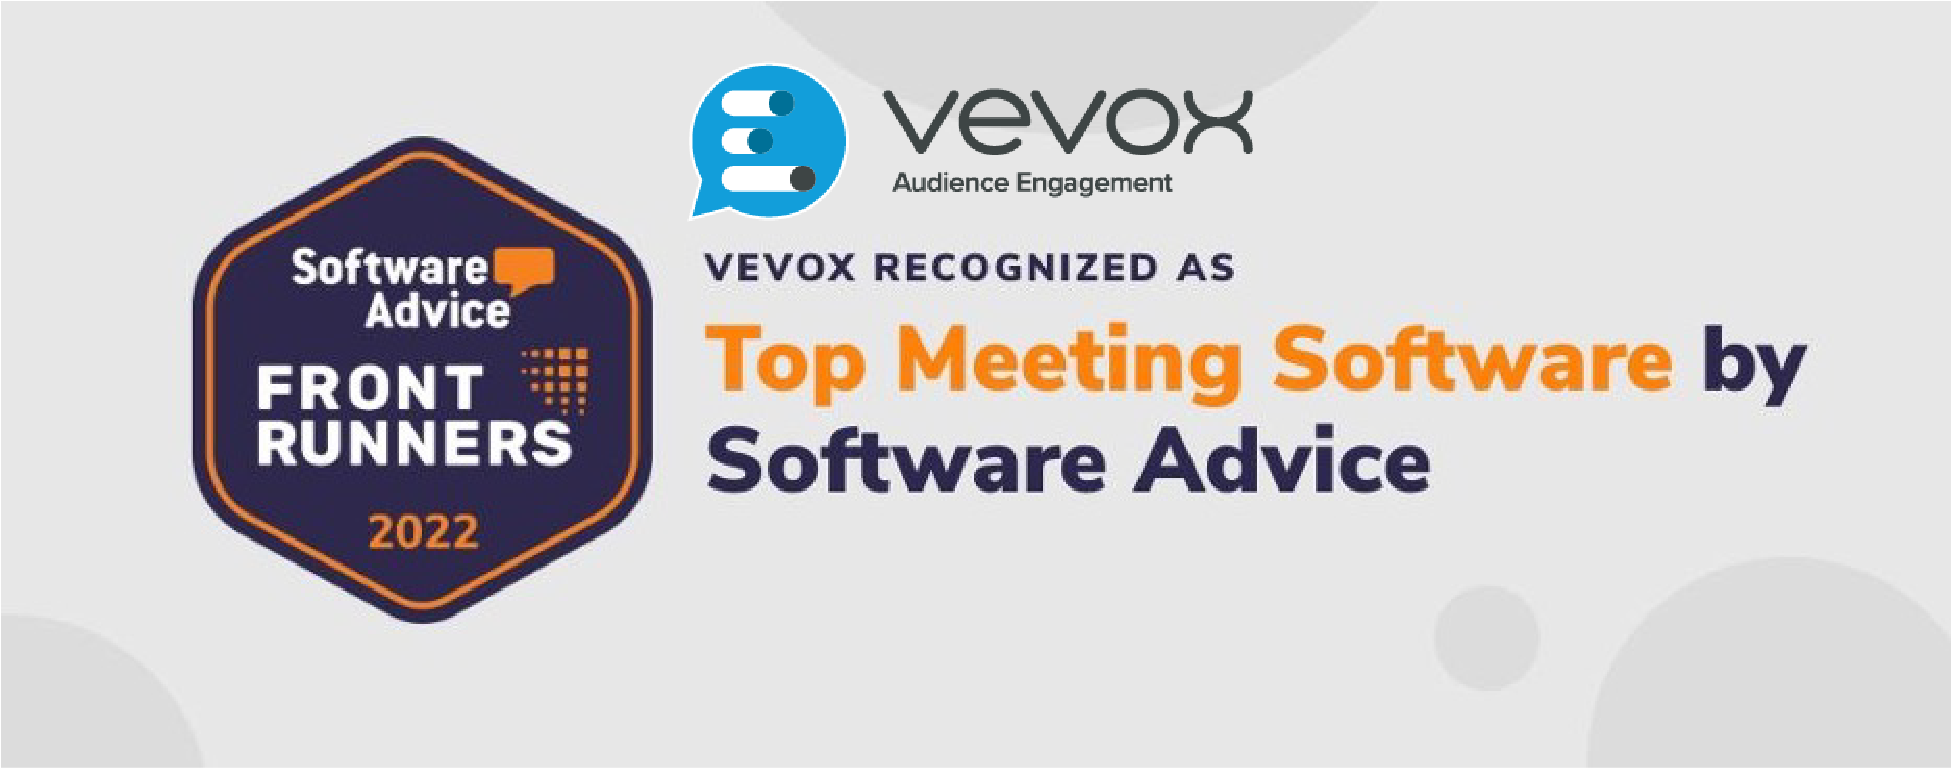 Vevox Recognized As Top Meeting Software & Frontrunner in 2022